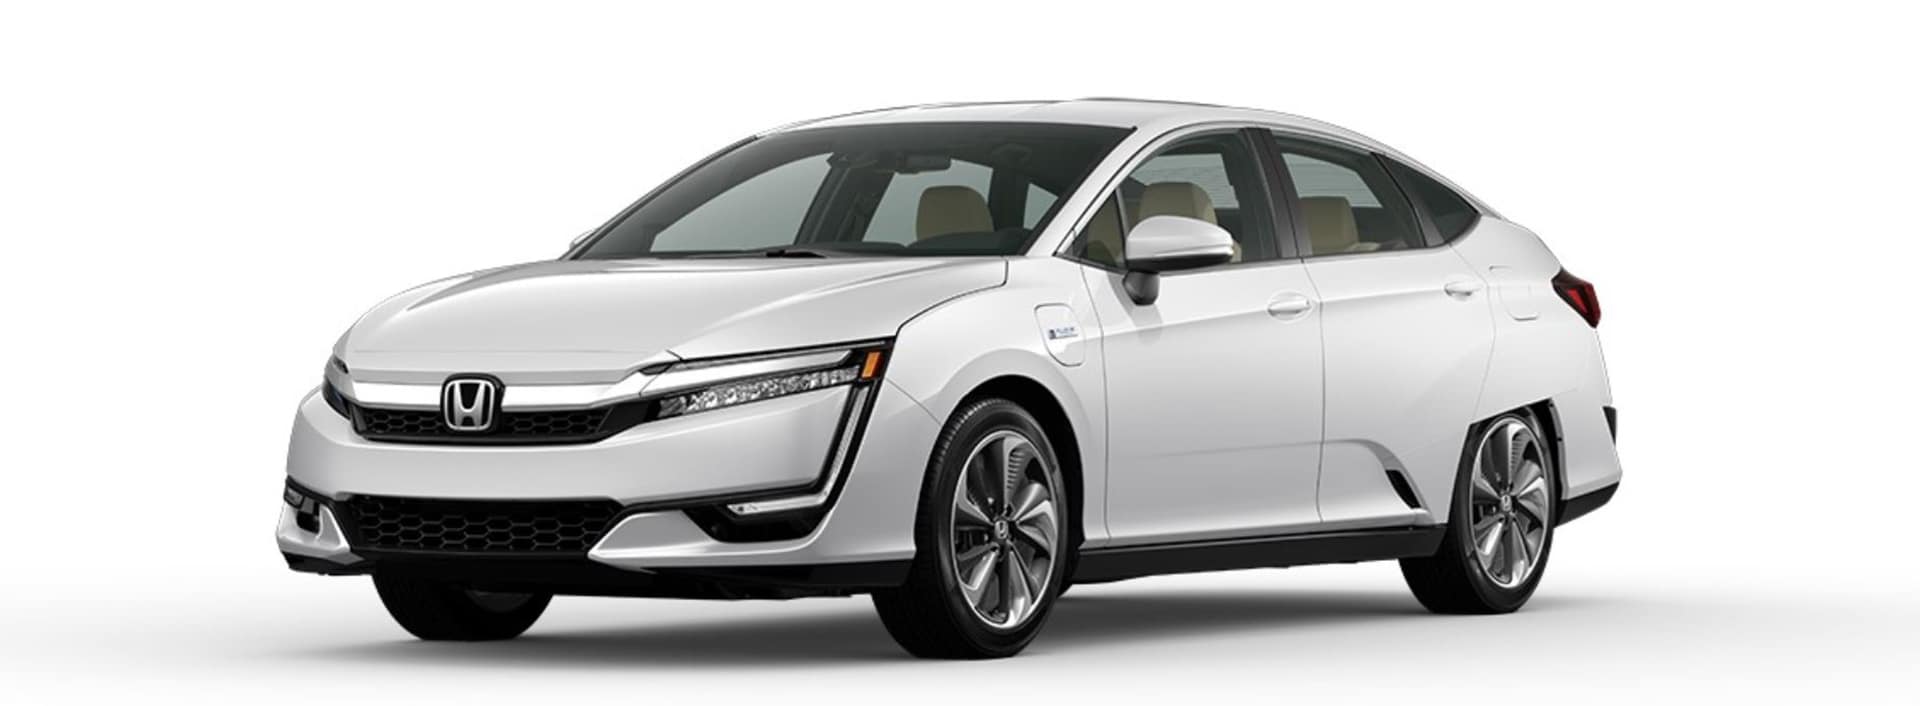 2021 Honda Clarity oem parts and accessories on sale